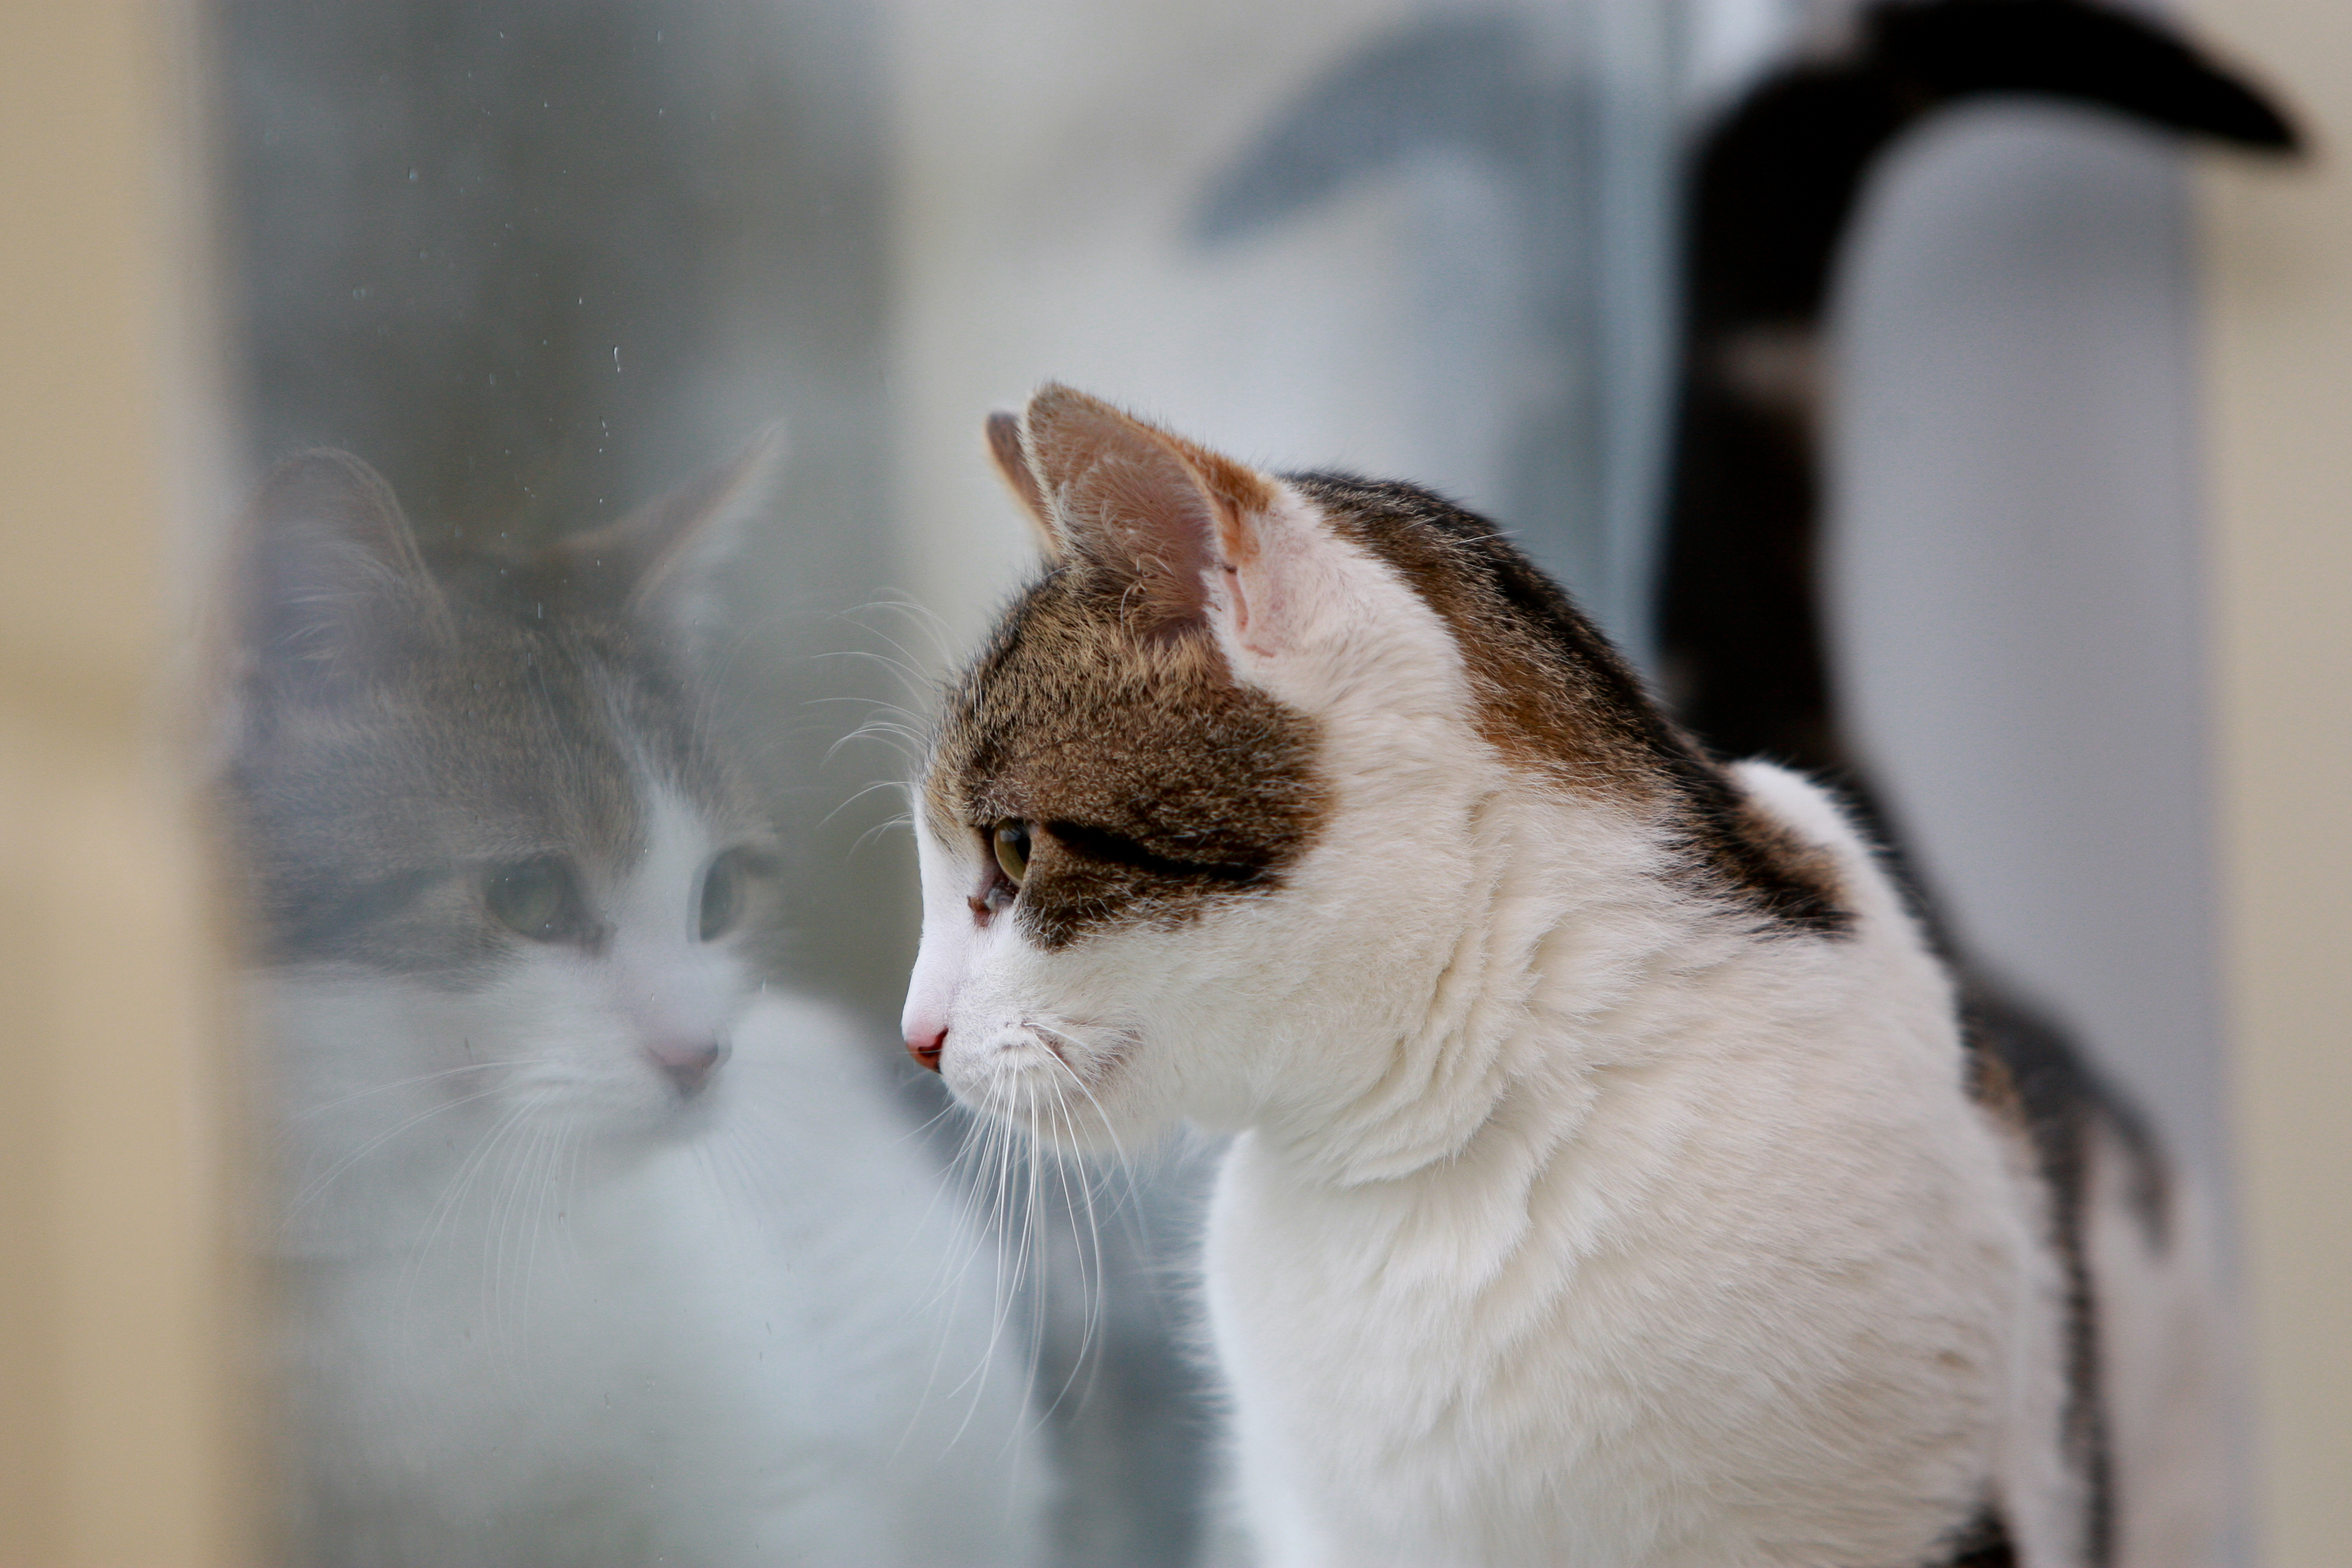 A white and tabby cat looks out of a window